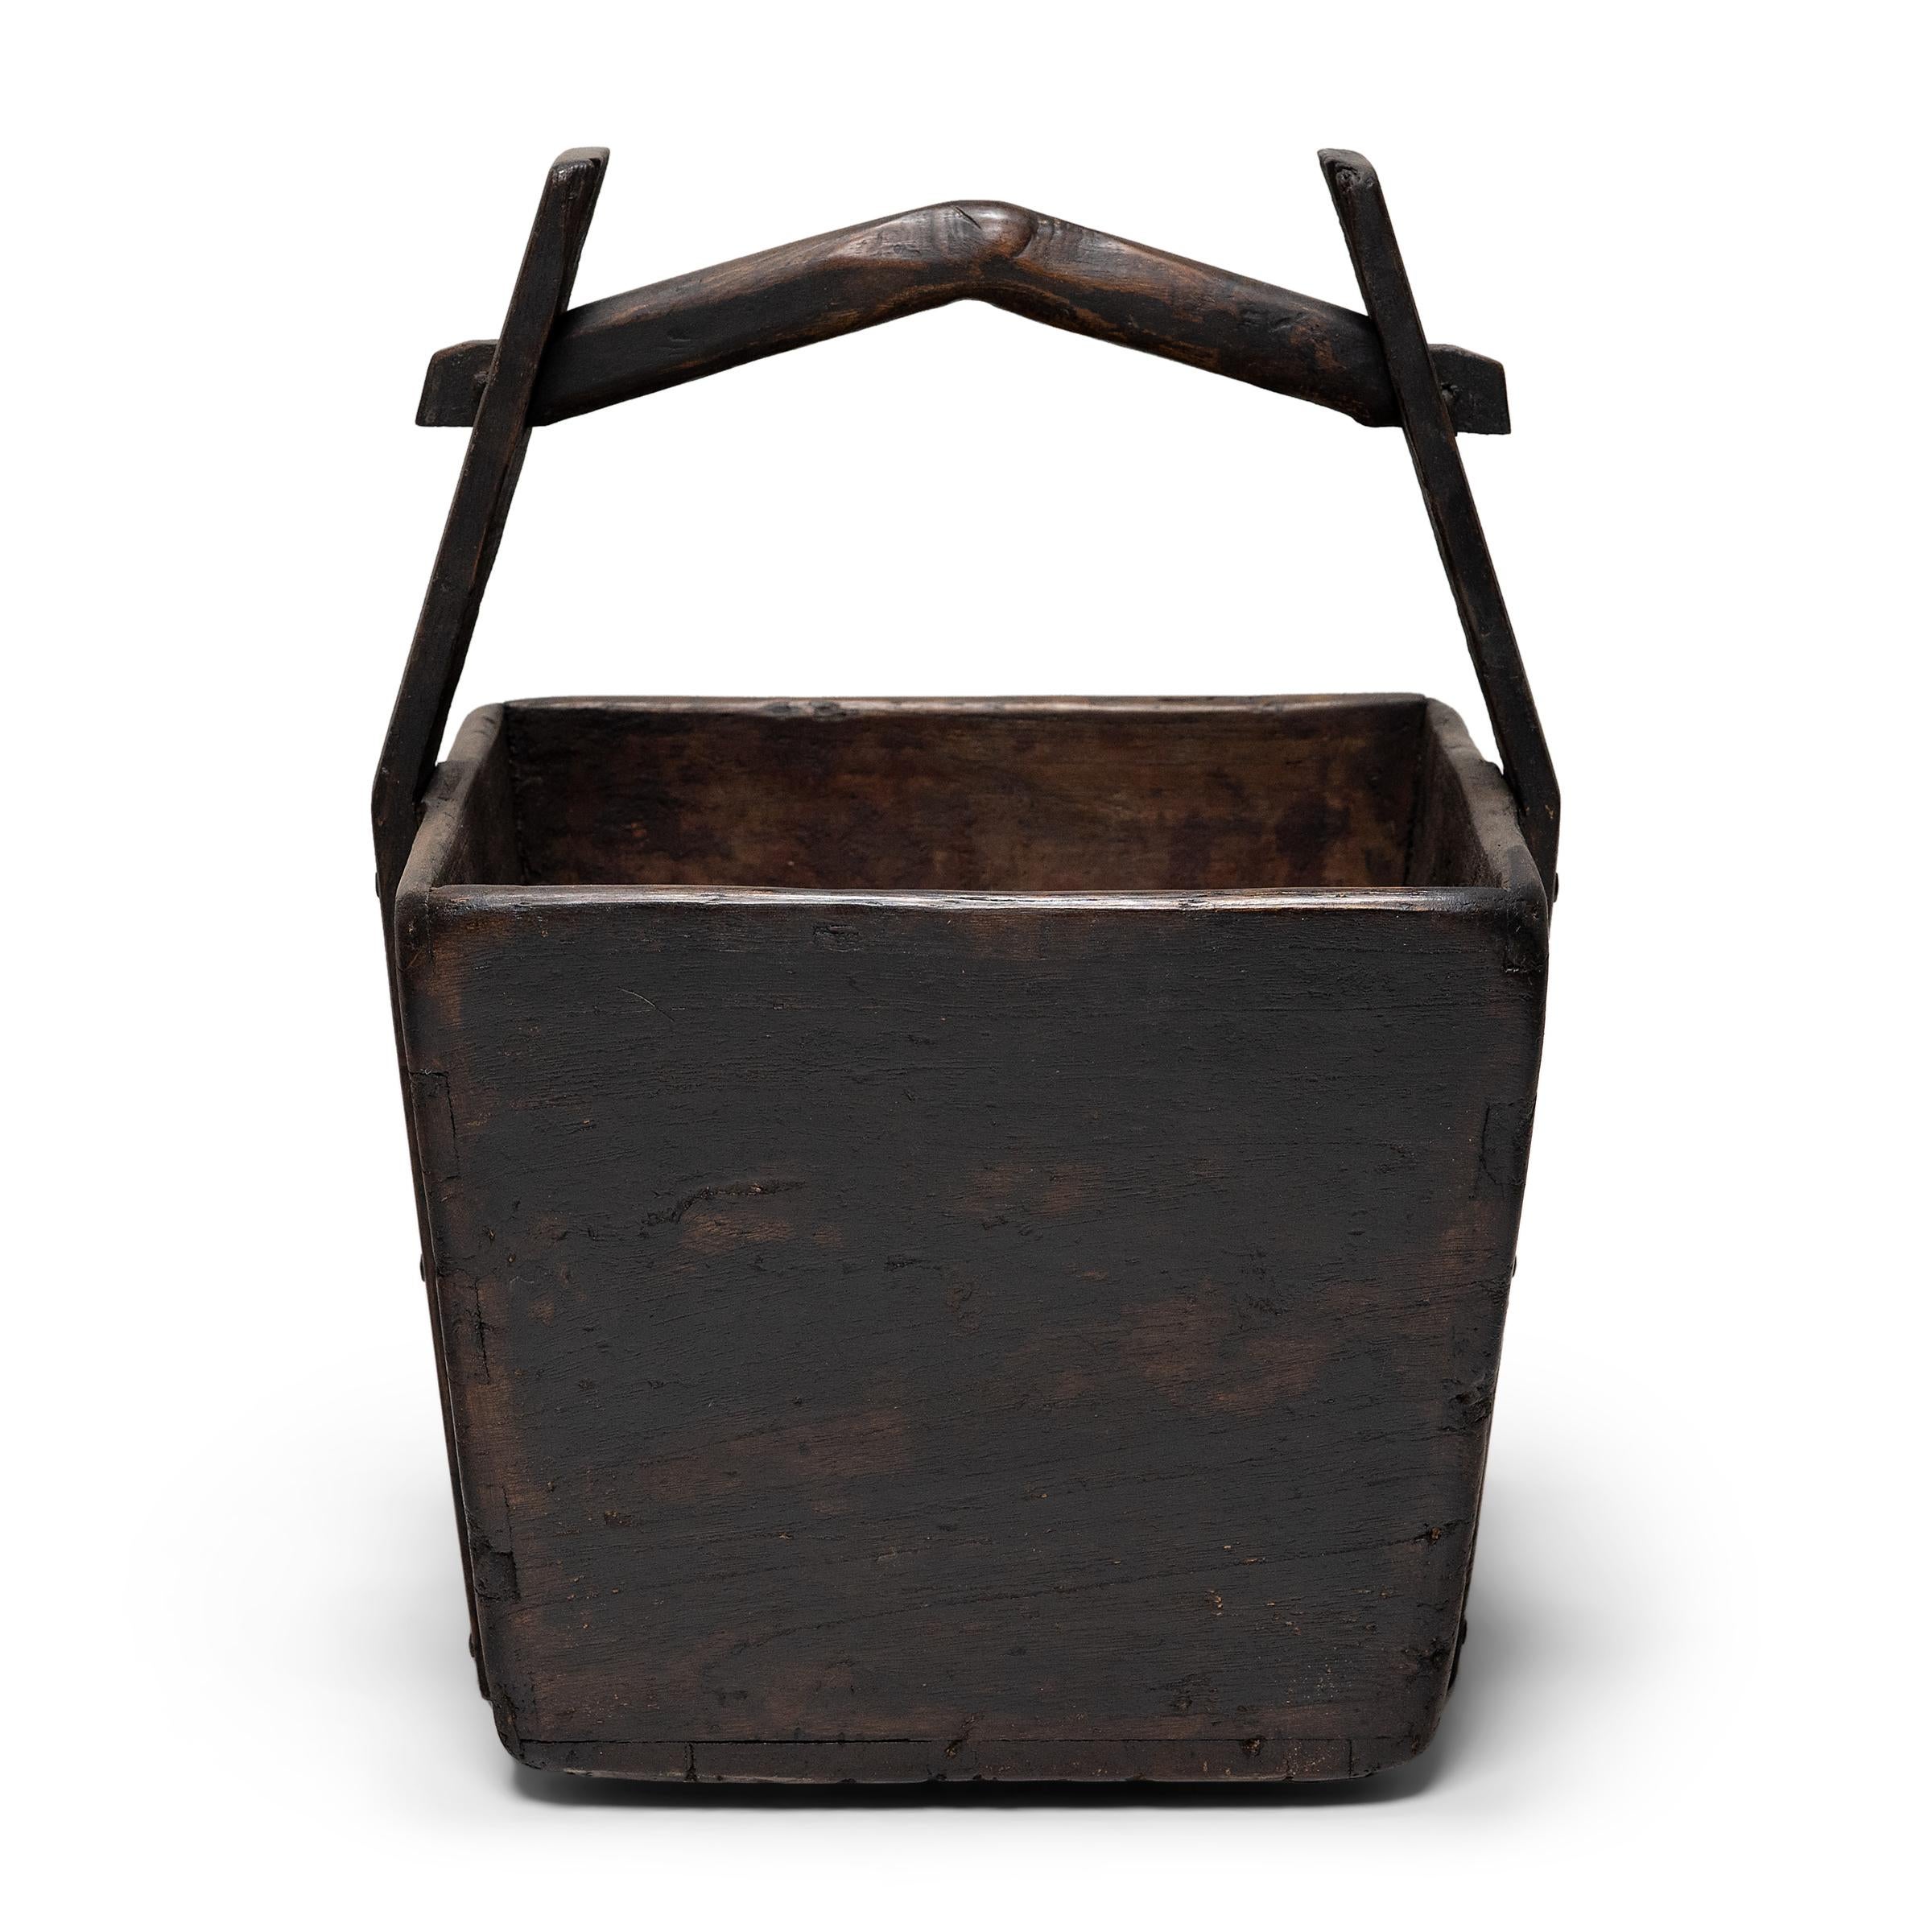 This hand-crafted wooden bucket was once used by farmers in Shanxi, China to transport their harvest of rice and grains over long distances. Counterbalanced by a second container, the pail would have been lifted by a pole threaded through the tall